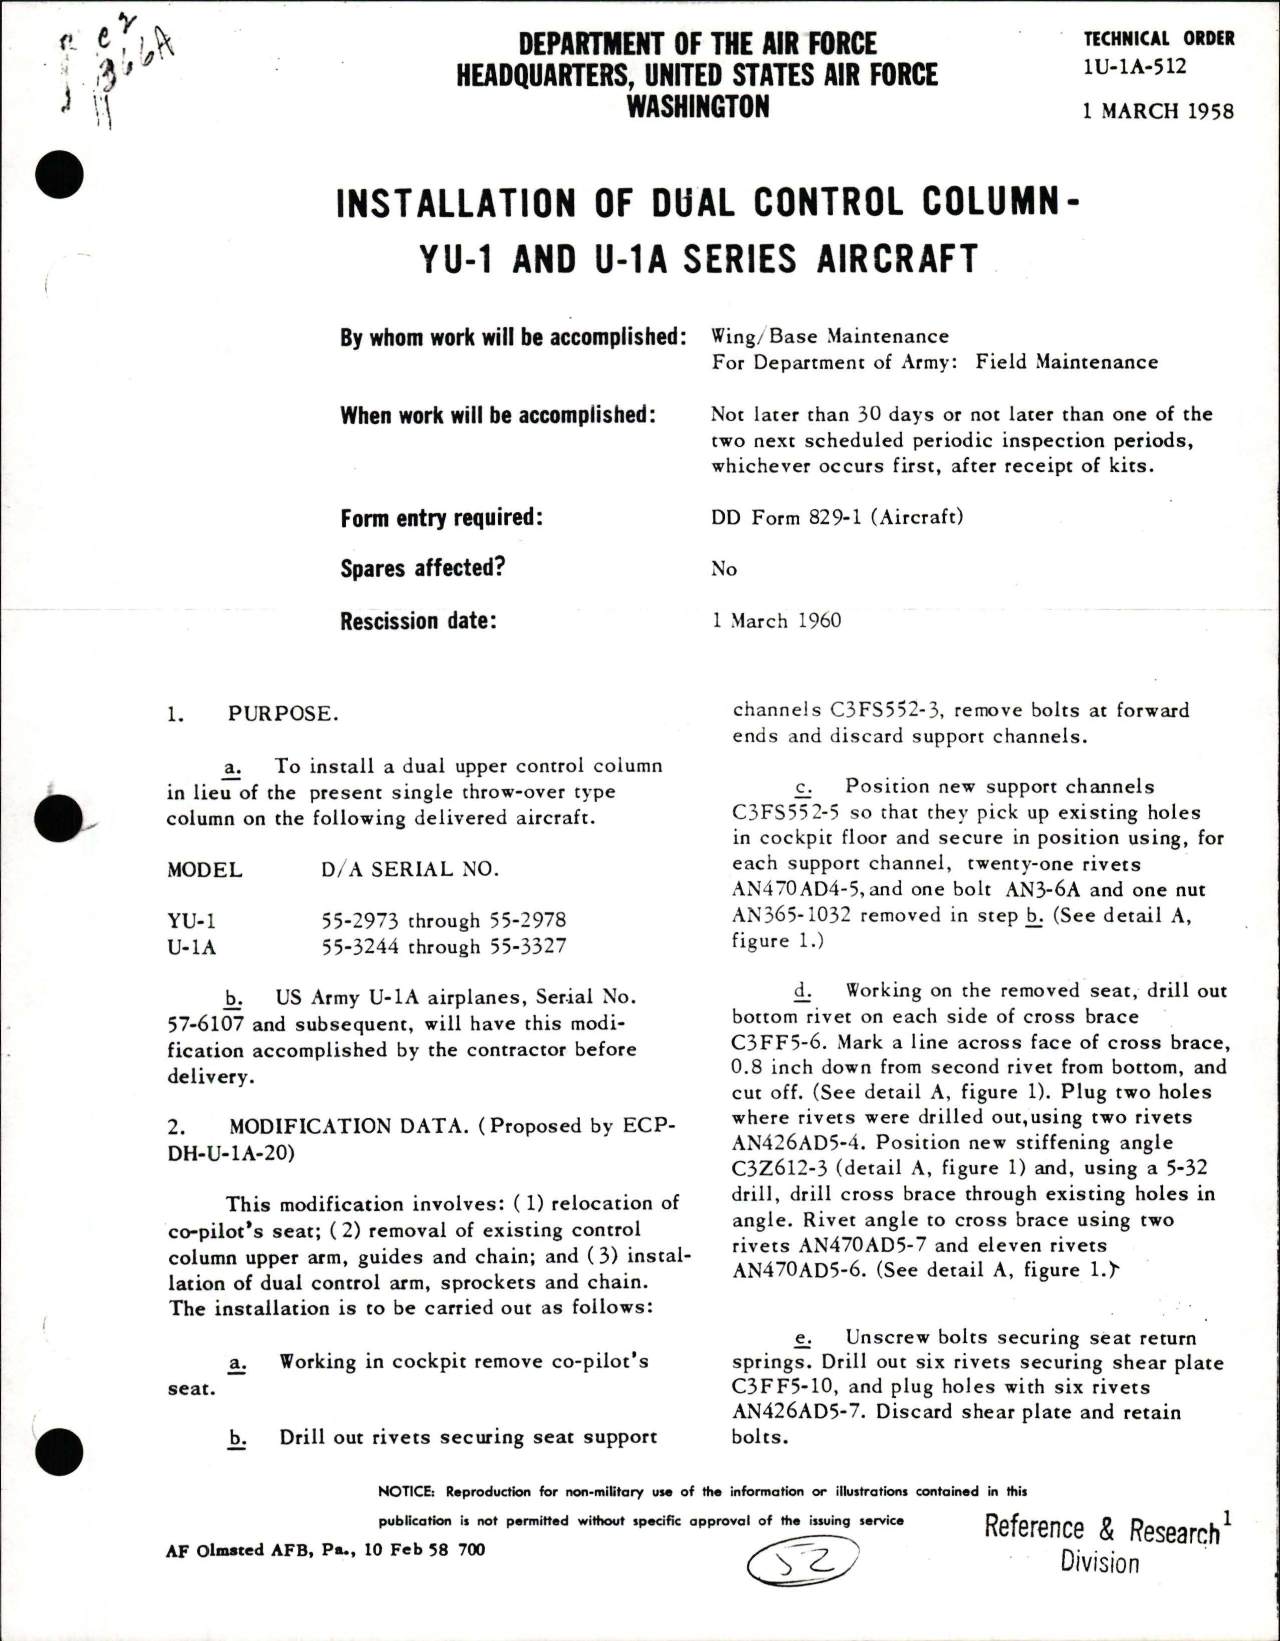 Sample page 1 from AirCorps Library document: Installation of Dual Control Column on YU-1 & U-1A